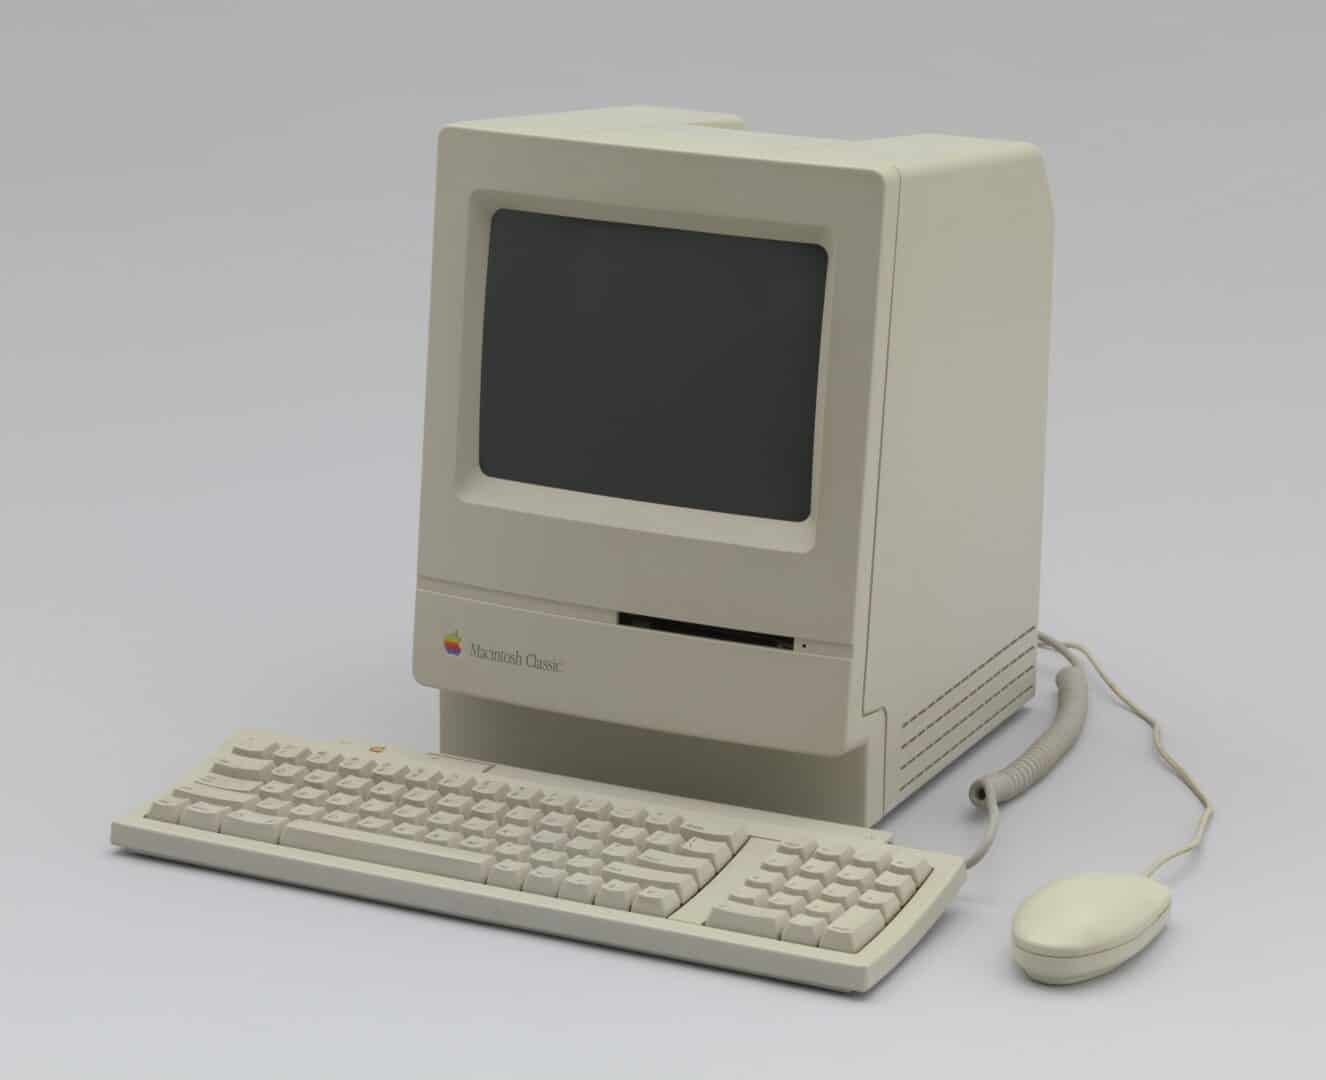 Macintosh Classic Explained - Silicon Features